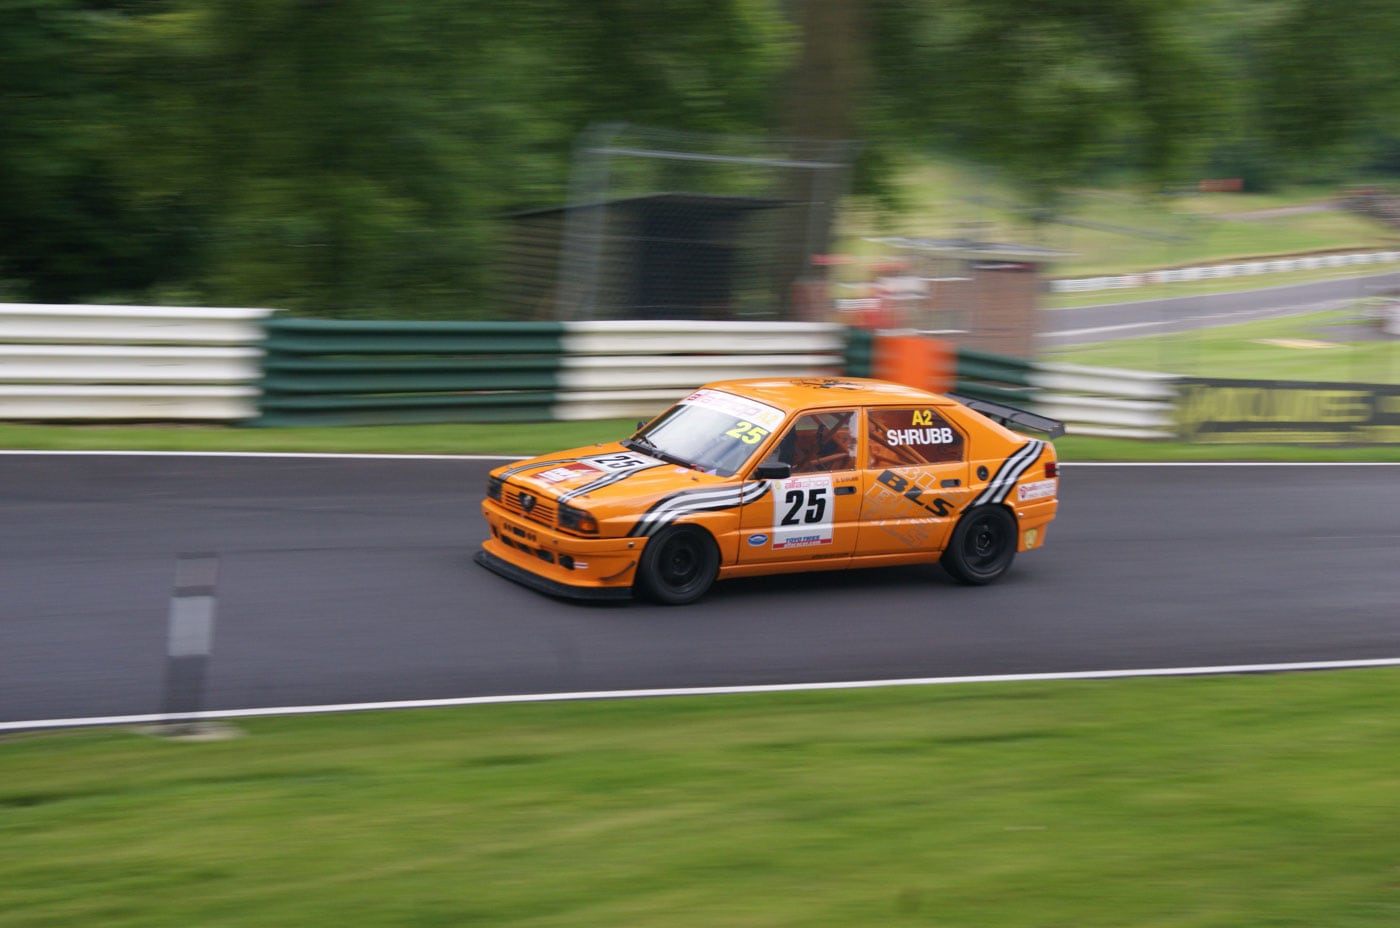 Cadwell Park Preview